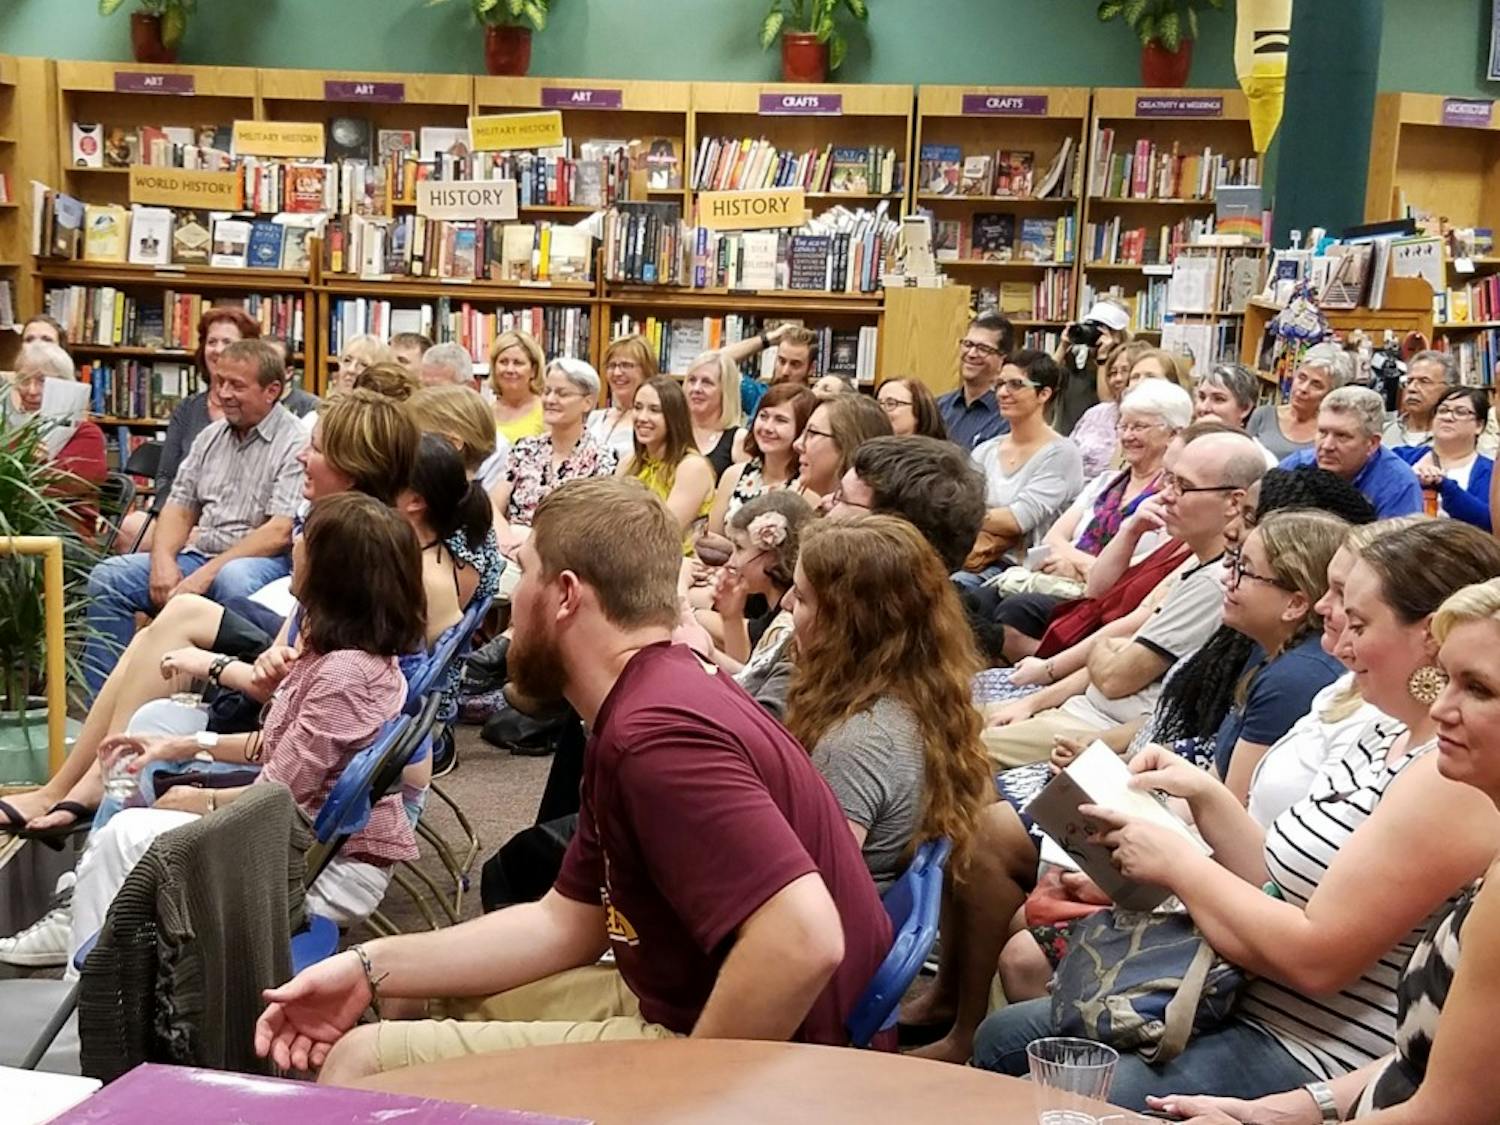 Audience members listening to a poetry reading at Changing Hands Bookstore on Sept. 1, 2016. Rosemarie Dombrowski will be reading her poetry at Changing Hands Bookstore on Dec. 2, 2016.